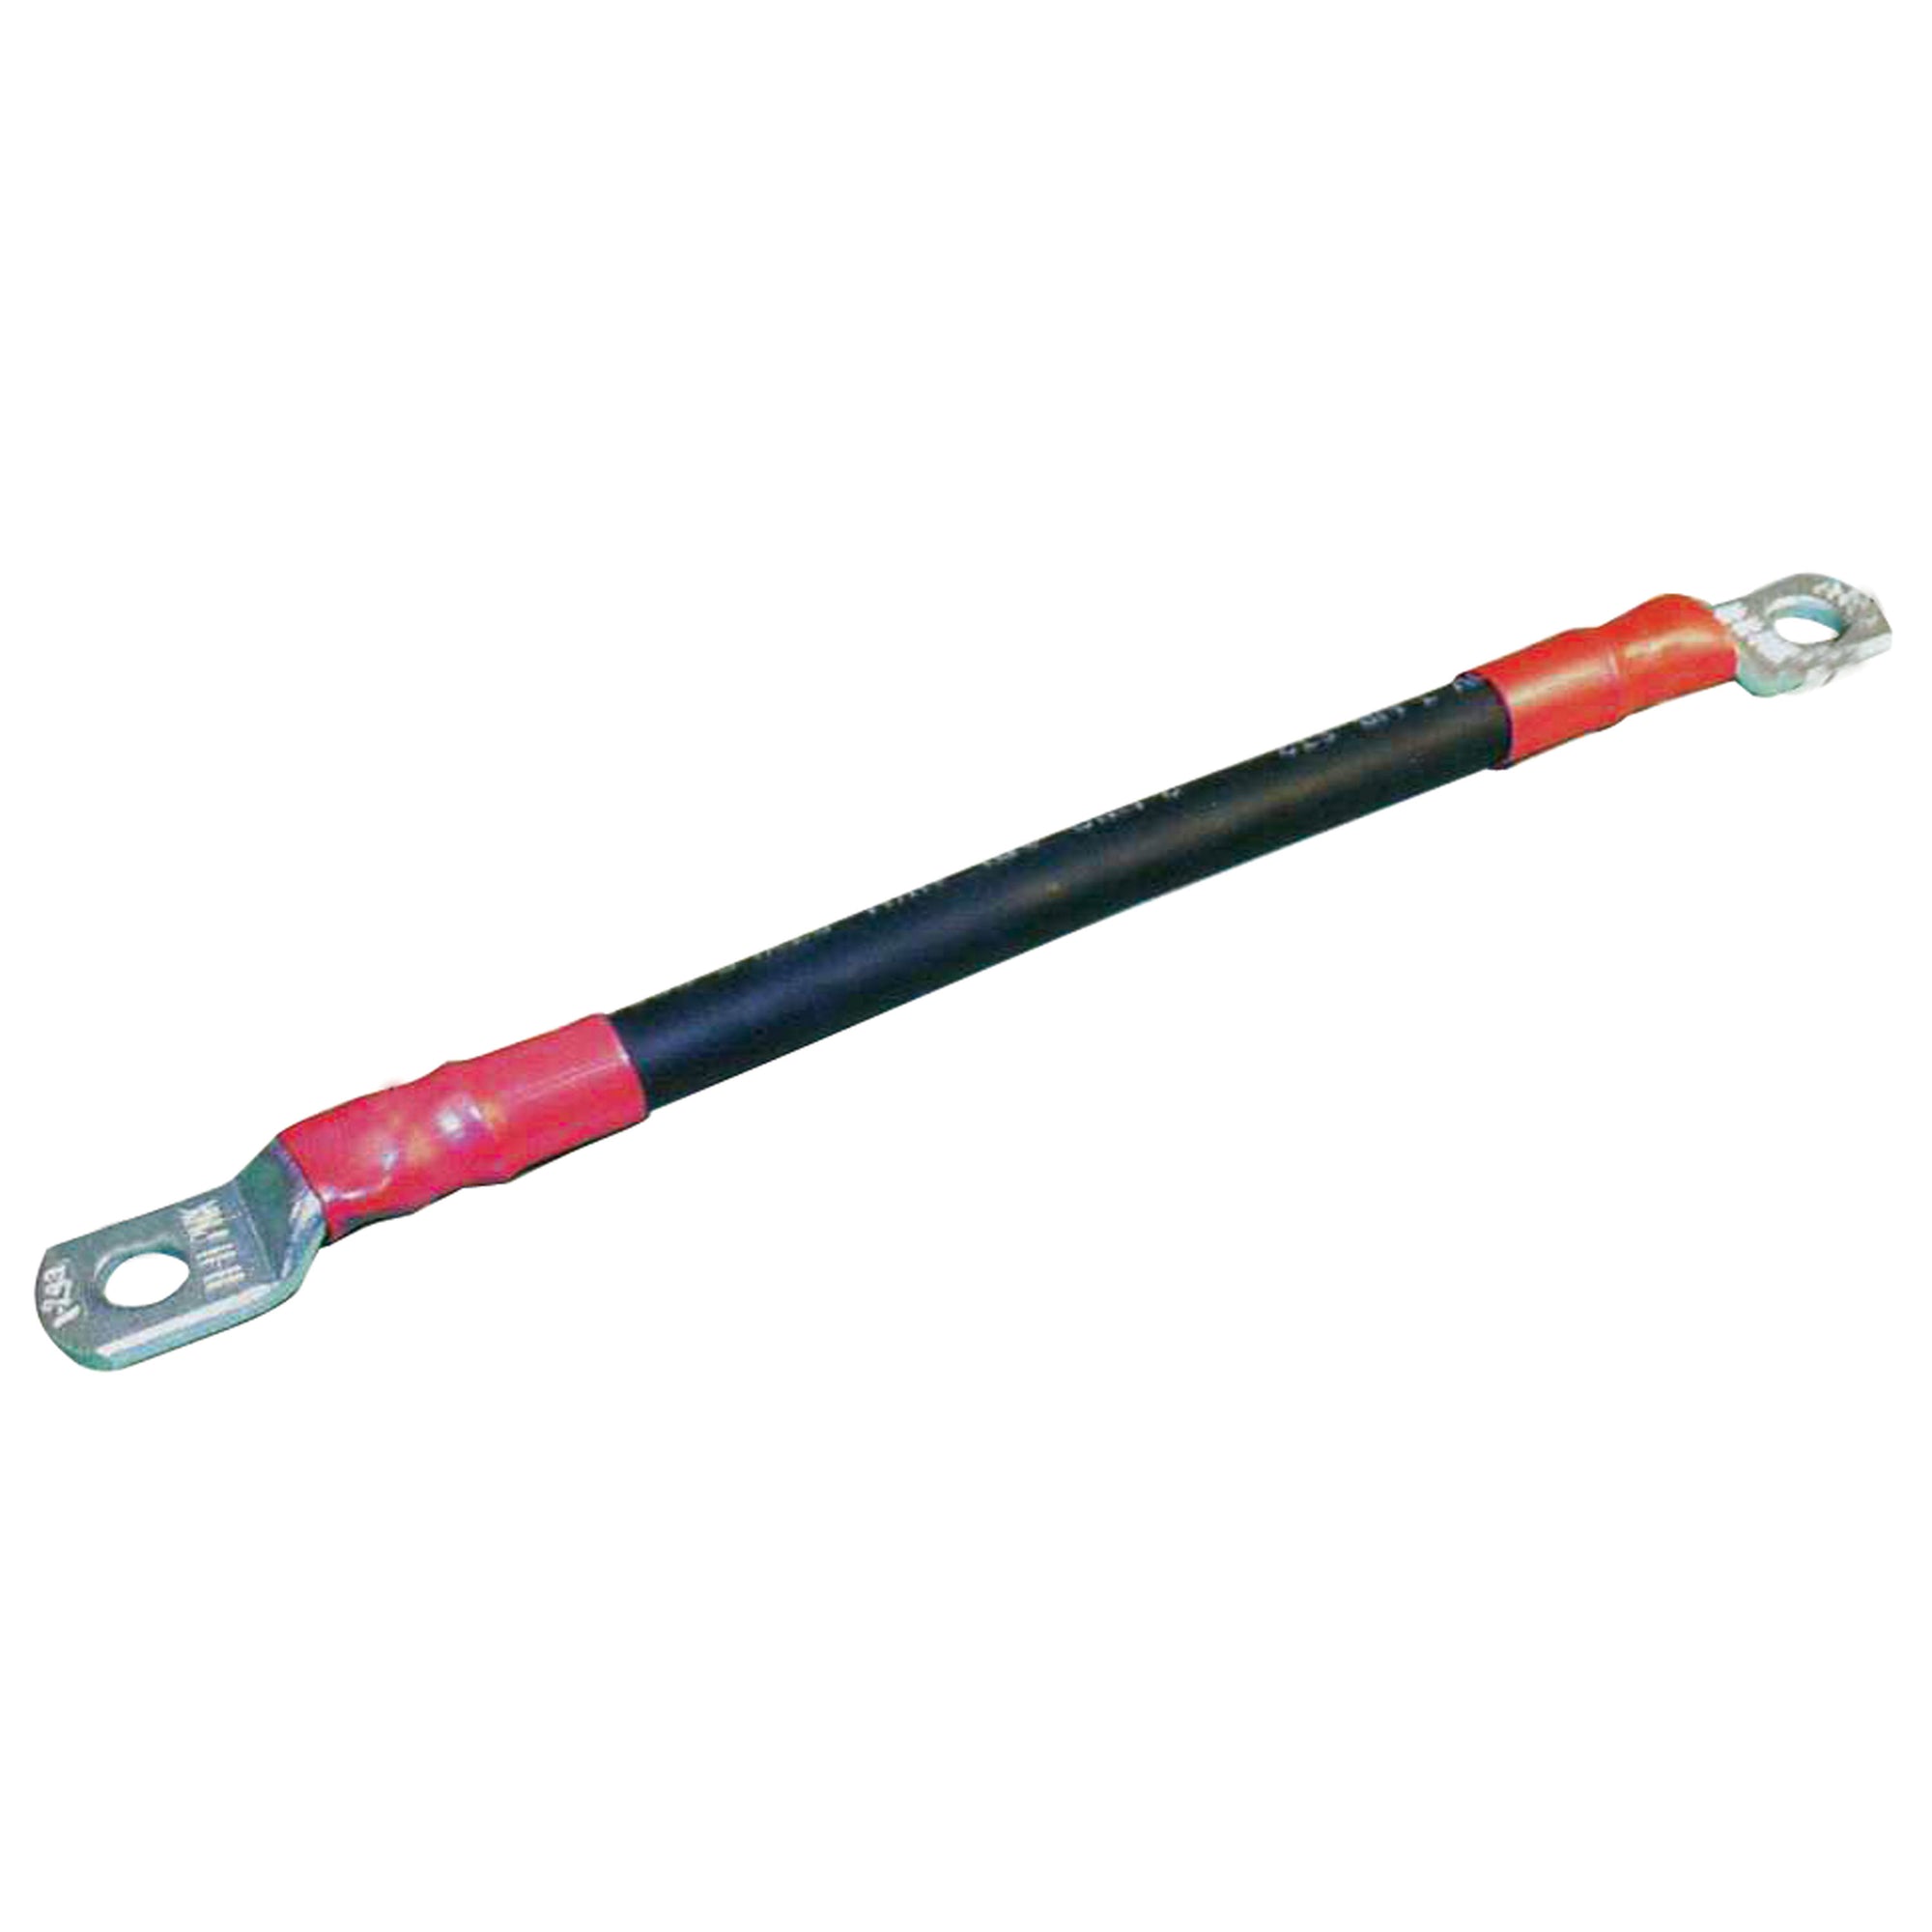 Quick Cable 205406 Inverter Hook Up Cable - 4 Gauge, Red